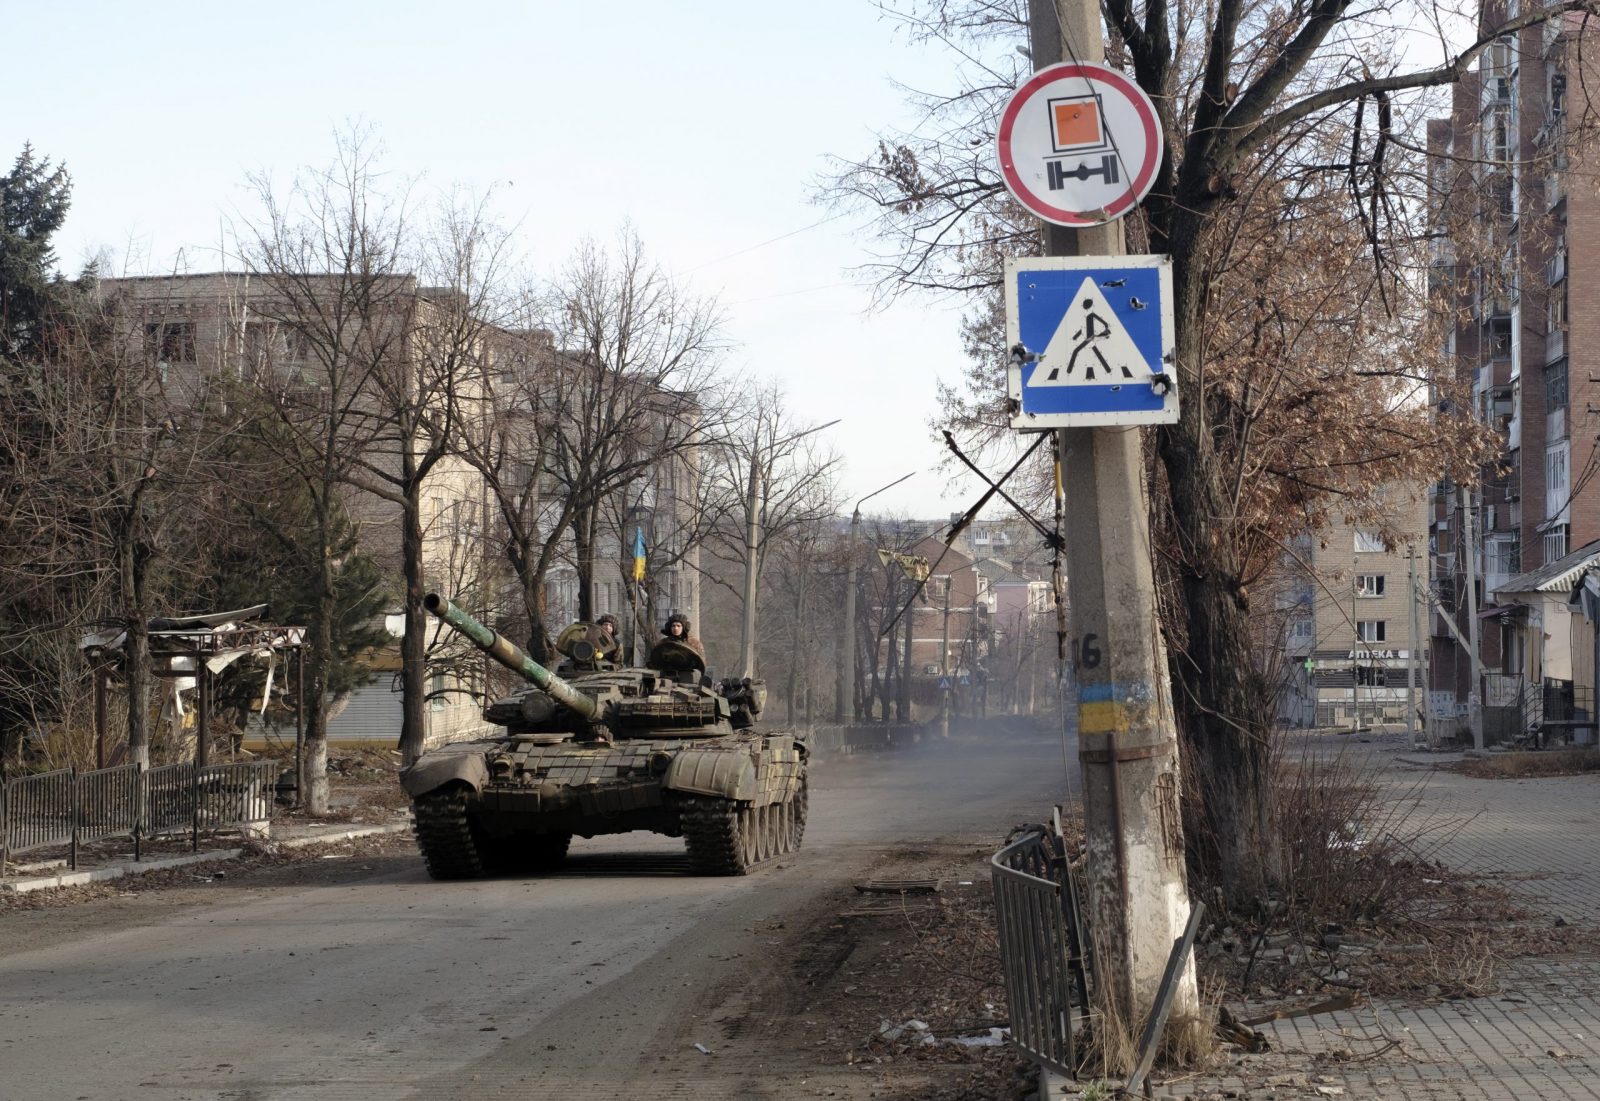 epa10390837 Ukrainian forces drive a tank across a street in the city of Bakhmut, Donetsk area, Ukraine, 04 January 2023 (issued 05 January 2023). Heavy fighting is taking place in the region. Russian troops entered Ukraine on 24 February 2022 starting a conflict that has provoked destruction and a humanitarian crisis.  EPA/GEORGE IVANCHENKO